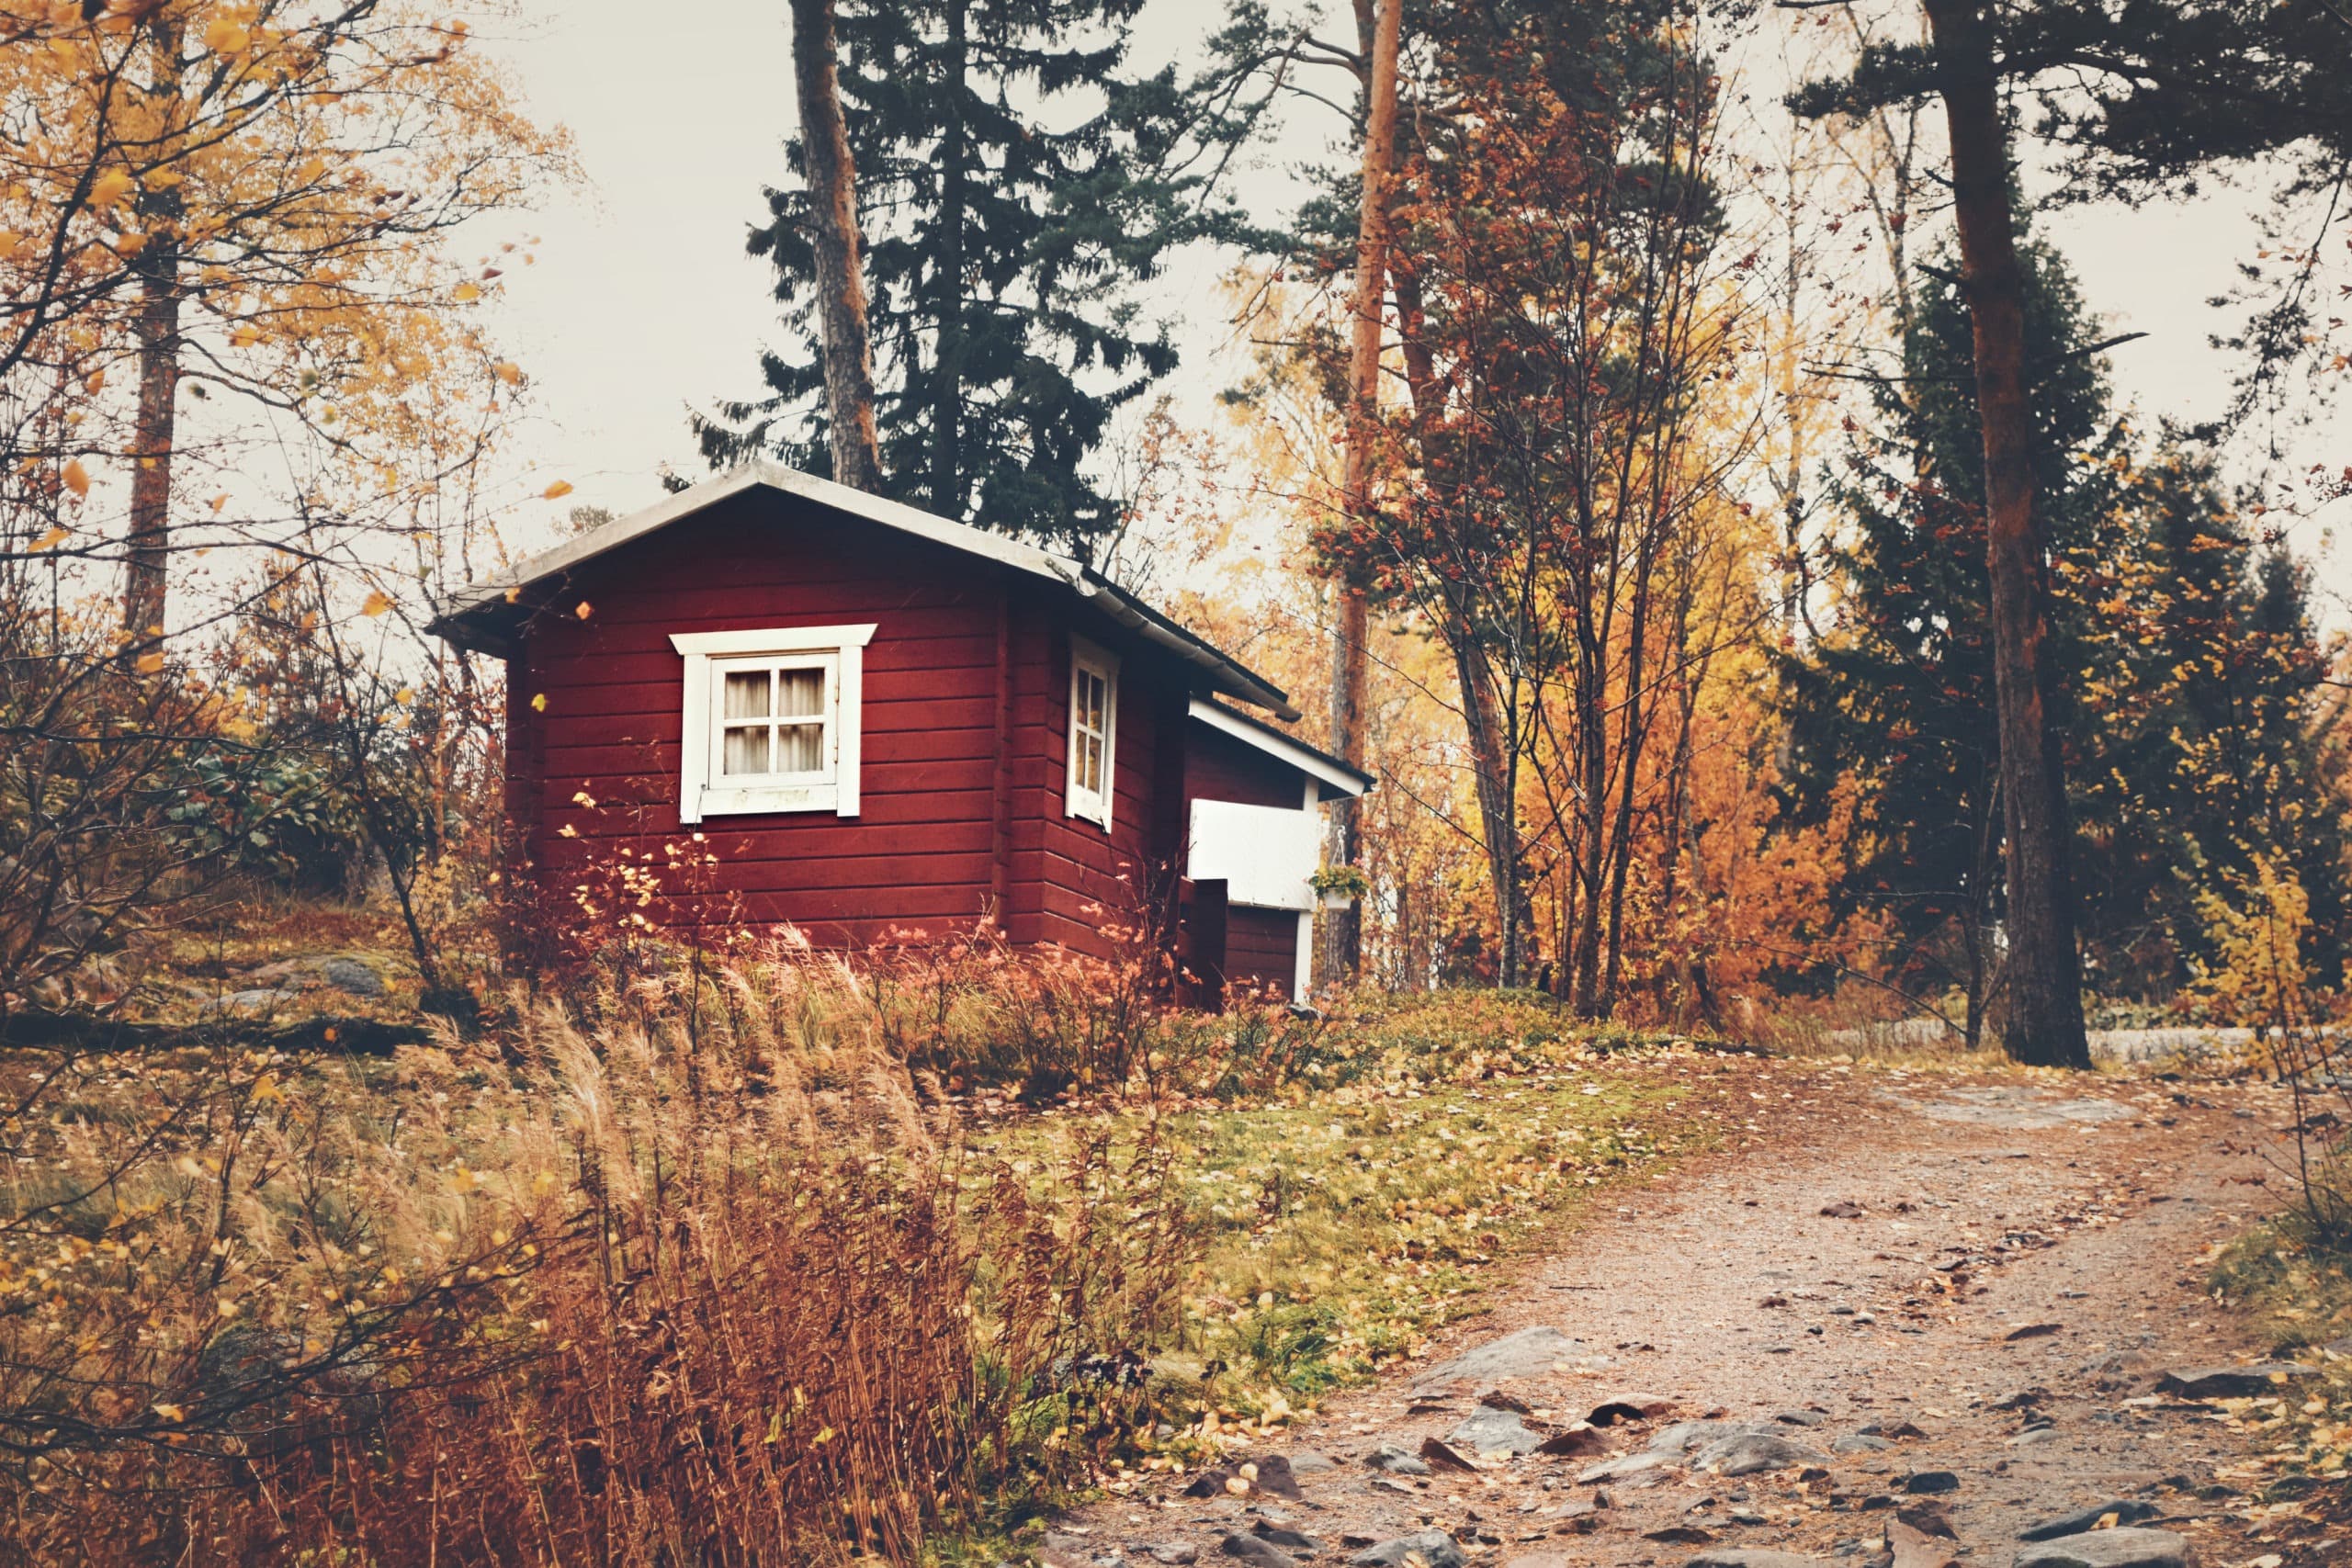 Red wooden house in orange autumn forest.